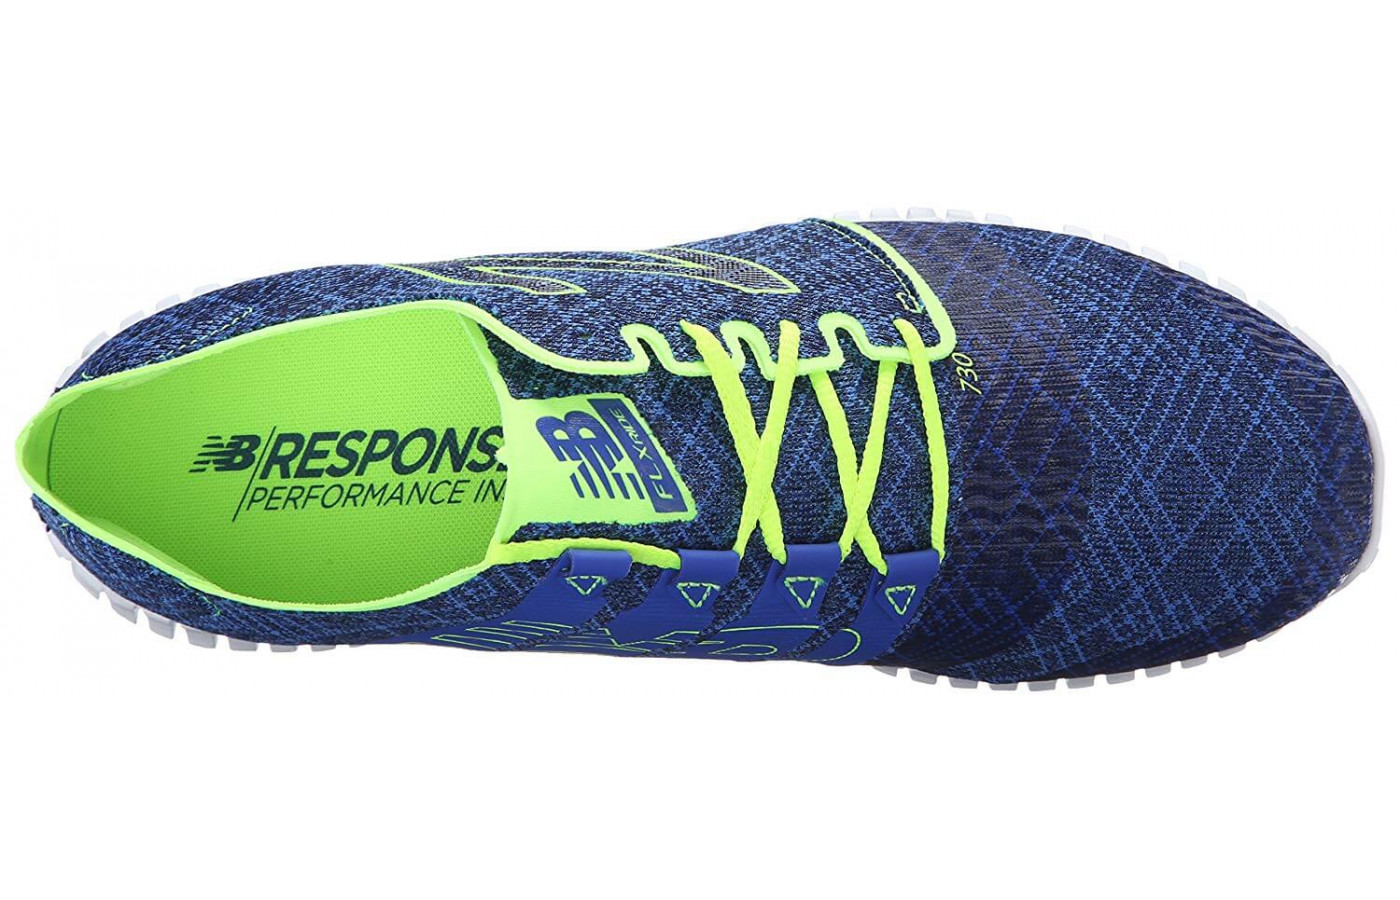 This is a lightweight, cross training shoe for racing. 